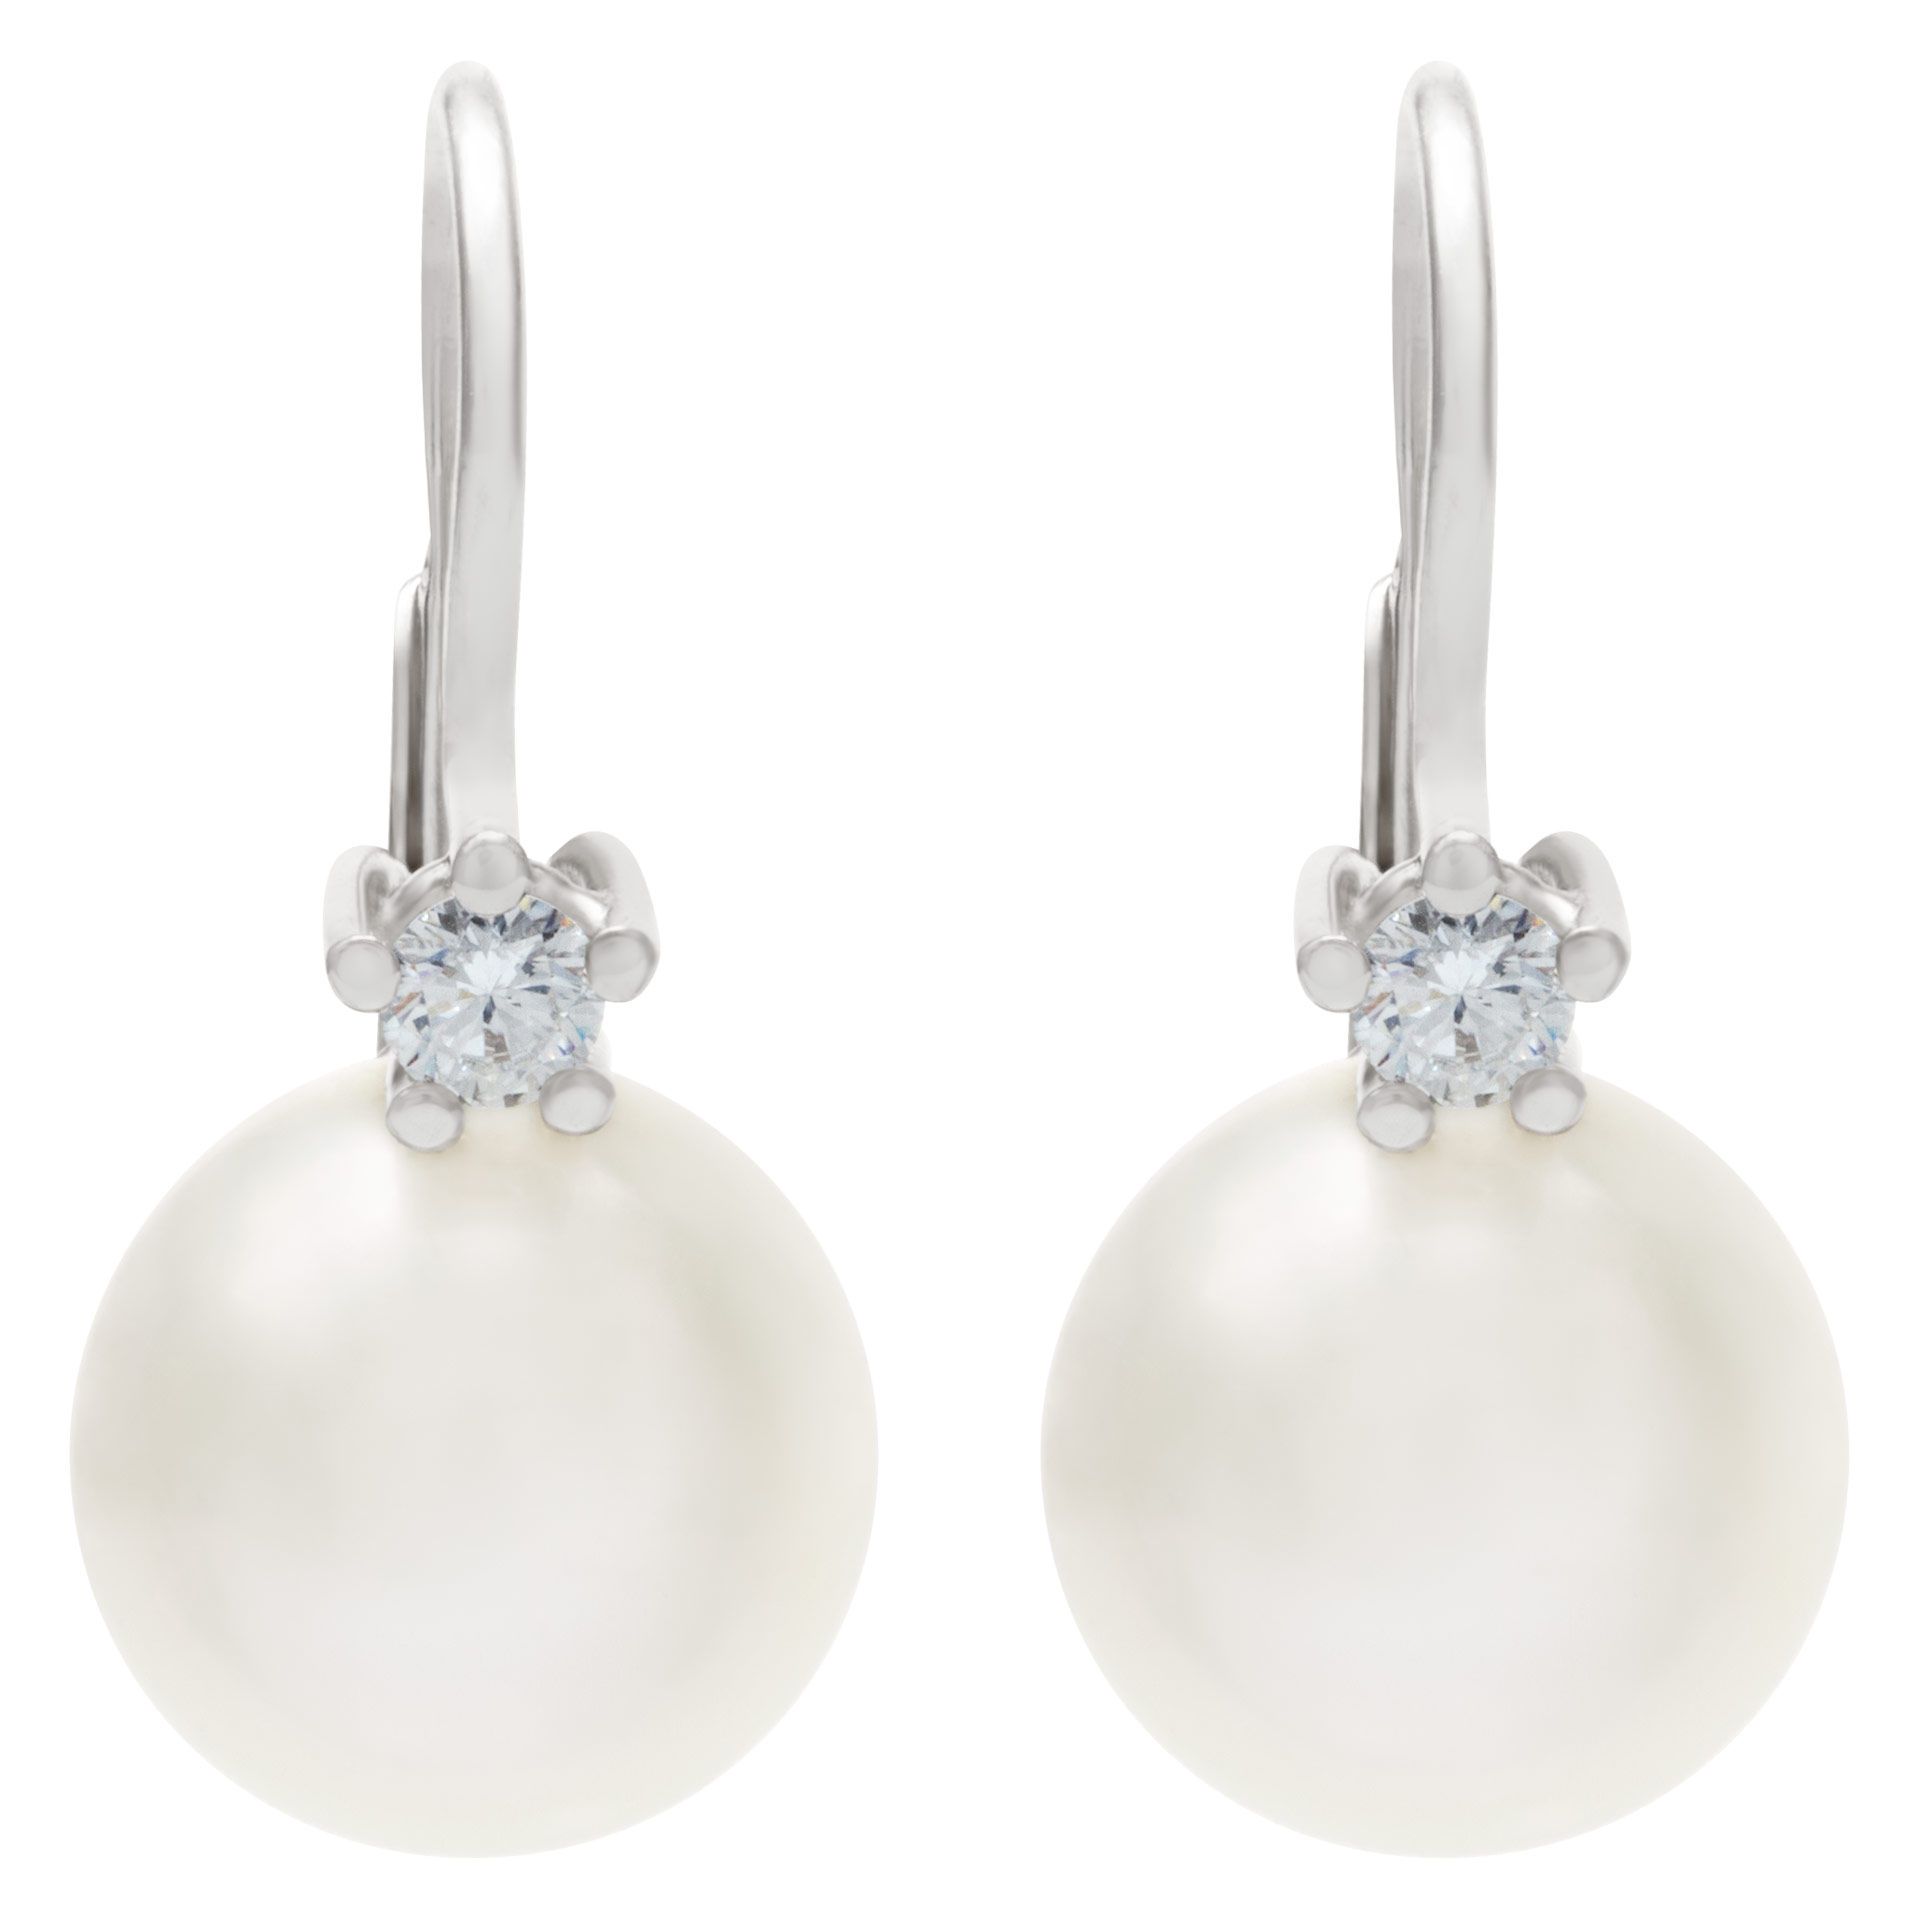 South Sea pearl with diamond accent earrings in 18k white gold. 0.24cts in diamonds. image 1